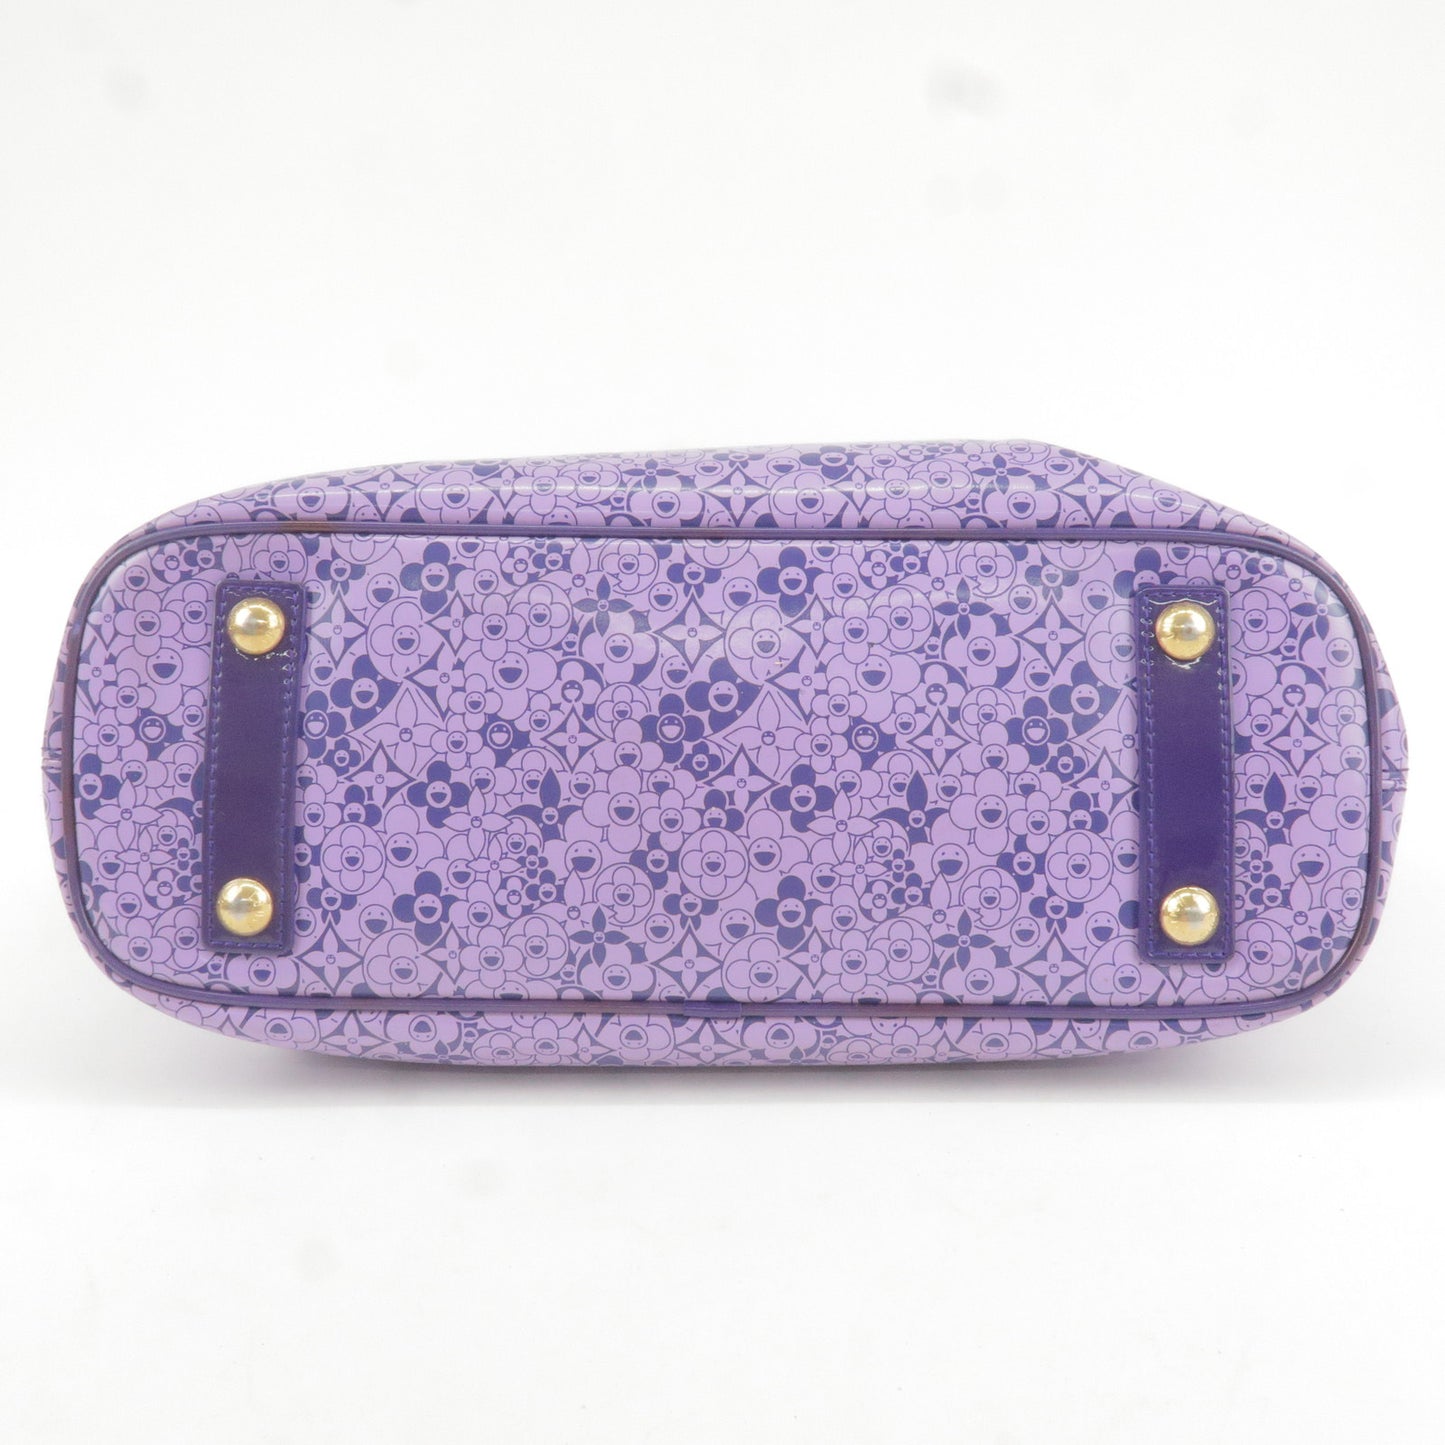 Louis Vuitton Limited Edition Violet Leather Cosmic Blossom